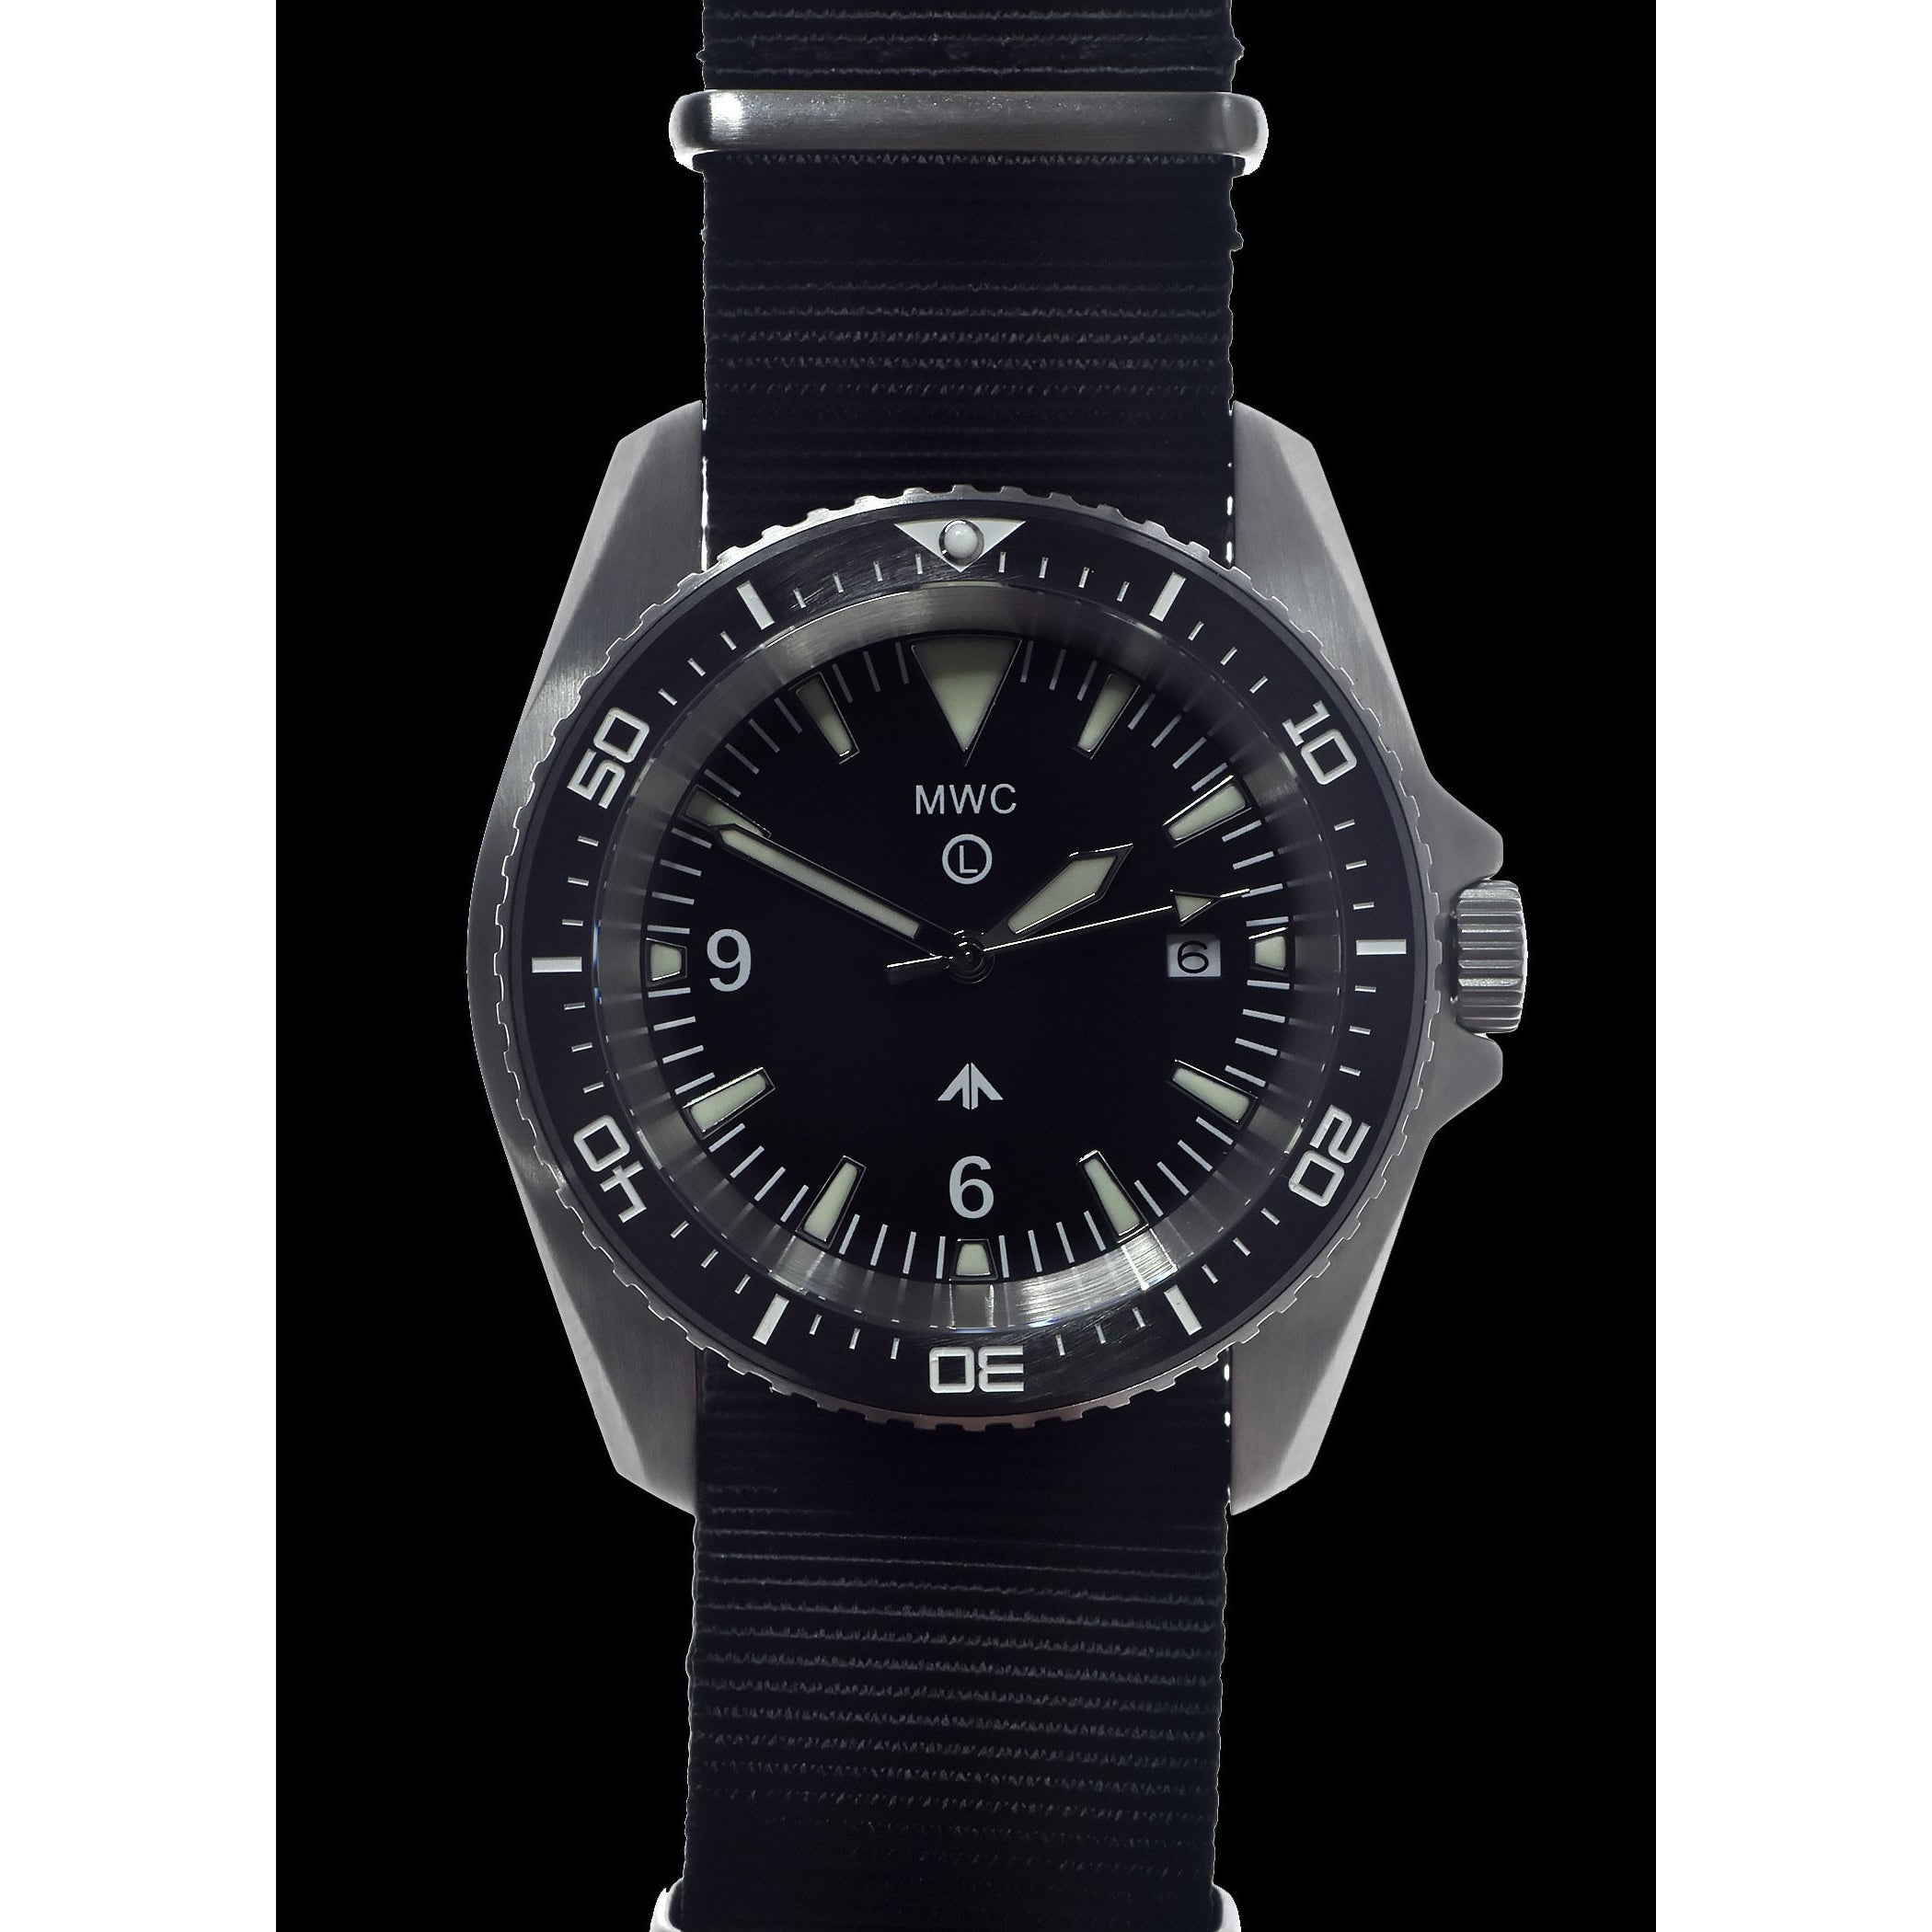 MWC Military Divers Watch in Stainless Steel Case (Quartz) with Sapphire Crystal and Ceramic Bezel